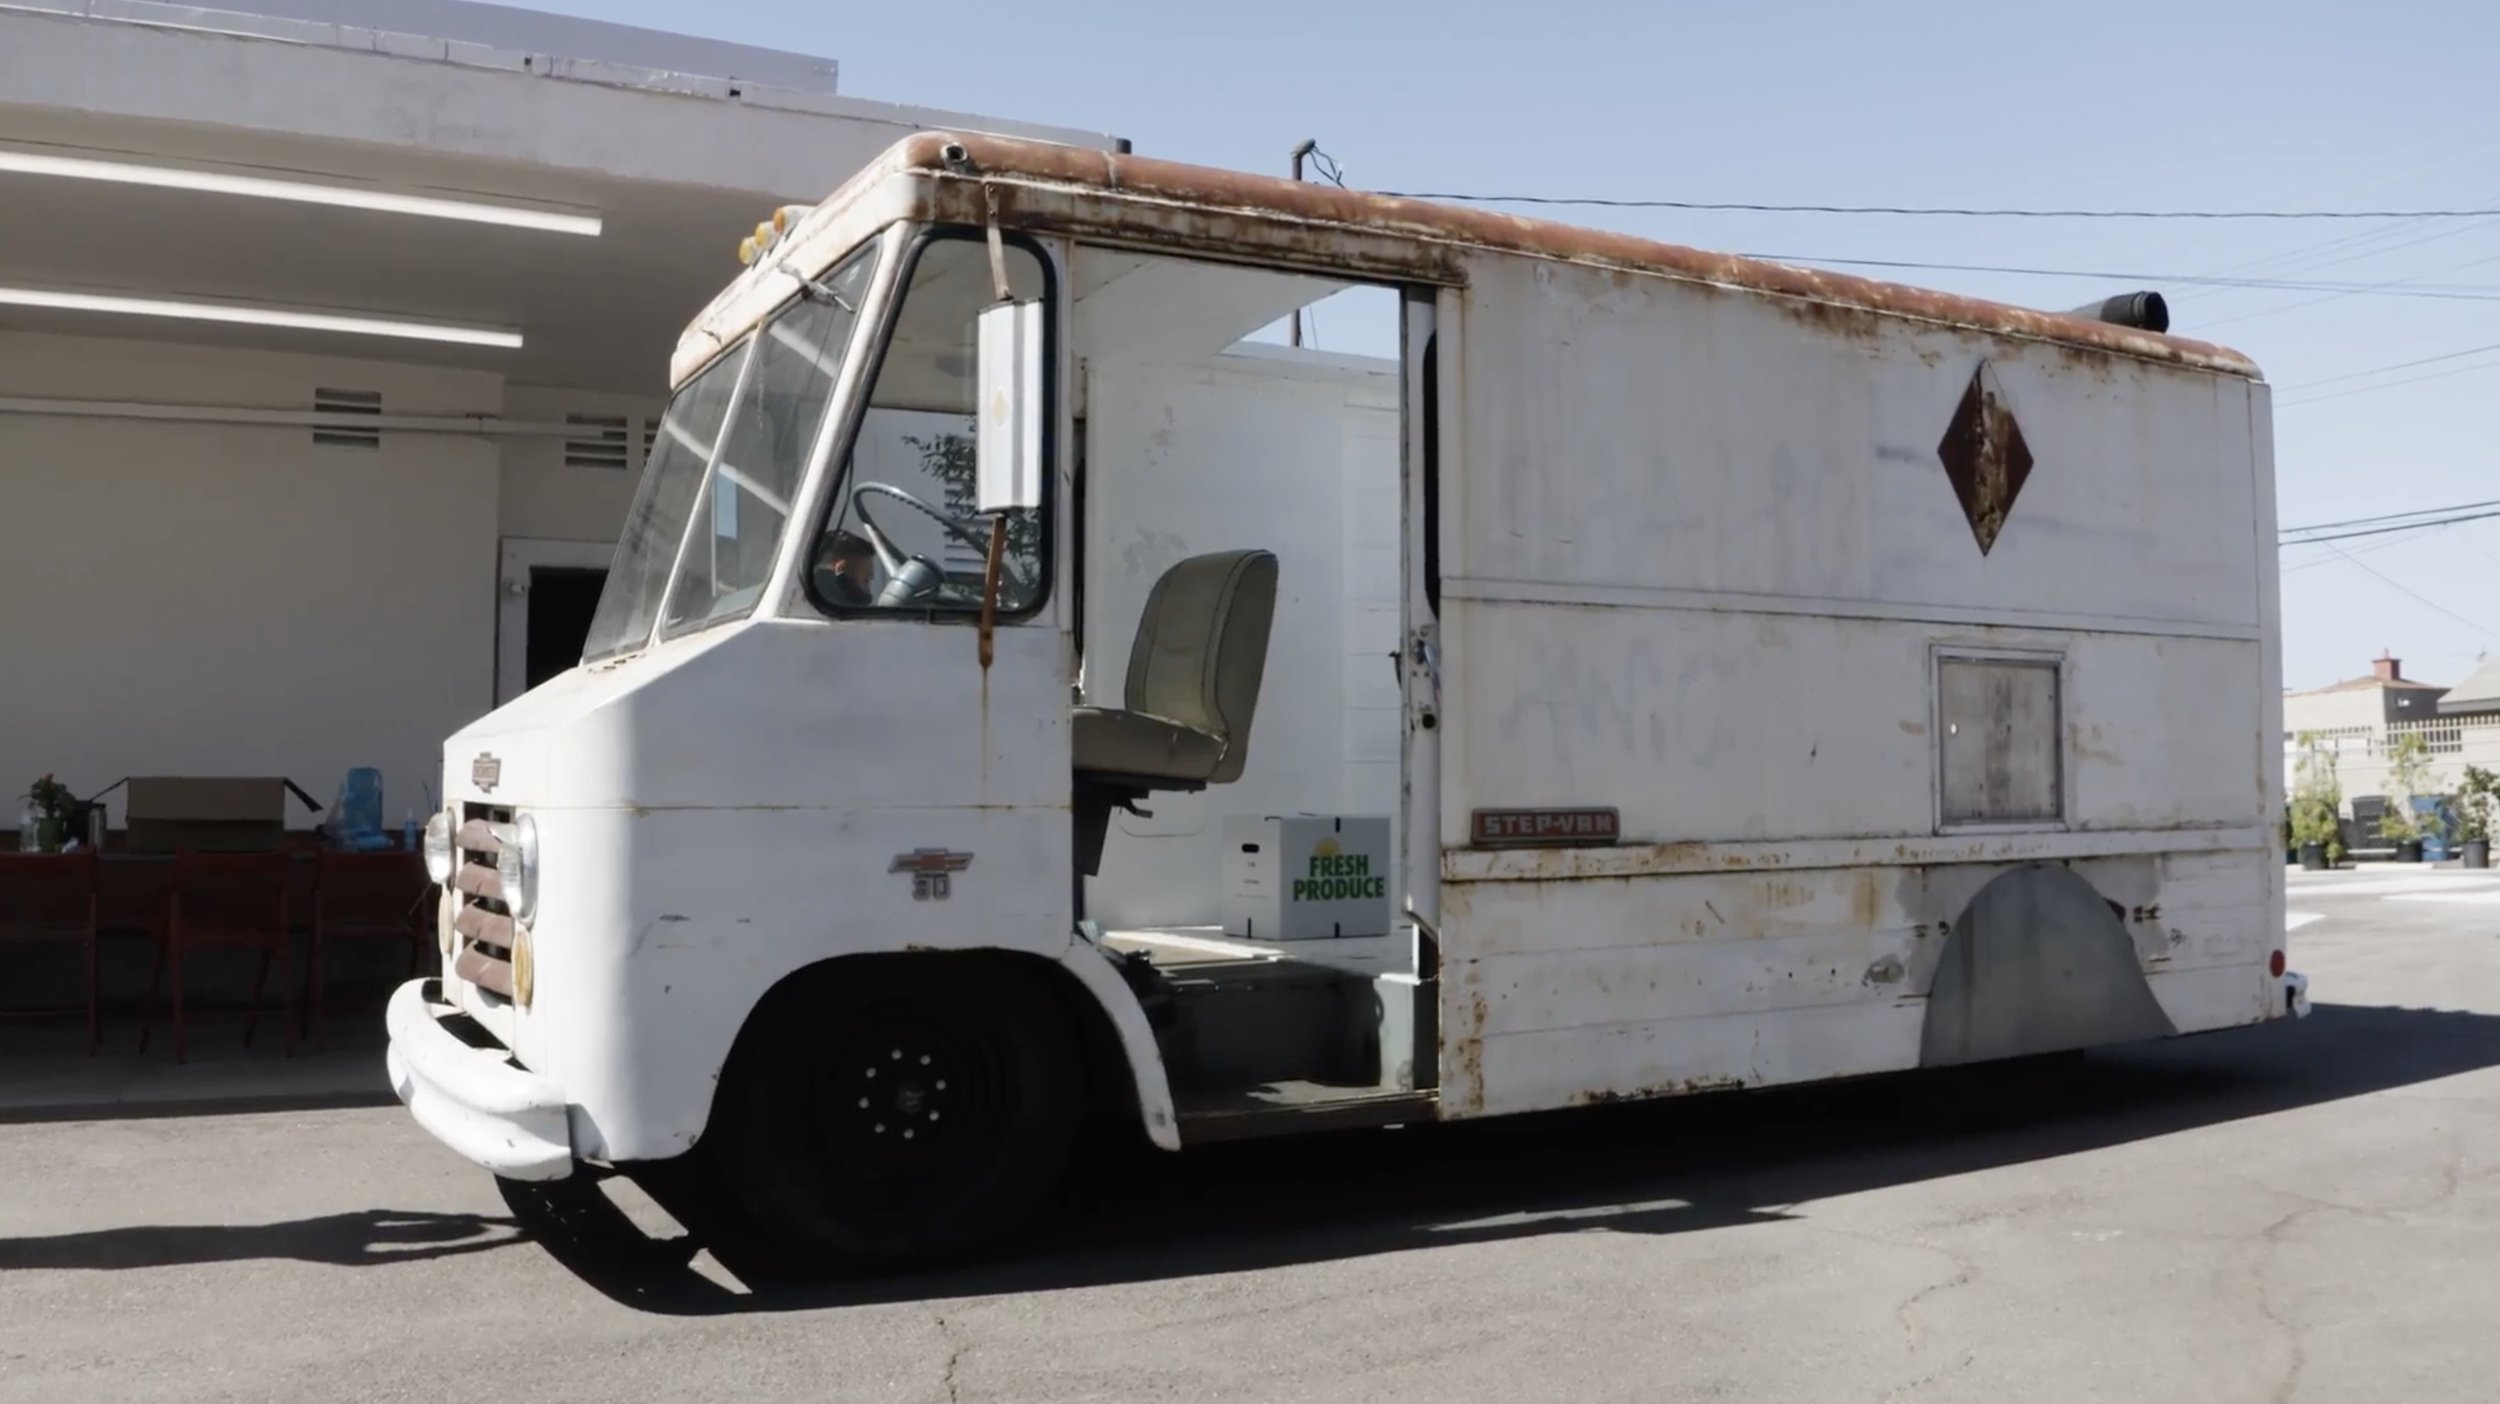  Crenshaw Dairy Mart Co-founder noé olivas,  domingo  (2012 - present); 63 sq. ft. 1967 Chevy Step-Van break-truck and rolling social sculpture. 6’2” x 10’3” x 7’2”. Image courtesy of Crenshaw Dairy Mart. Photographed by Filmblacktivist (@filmblackti